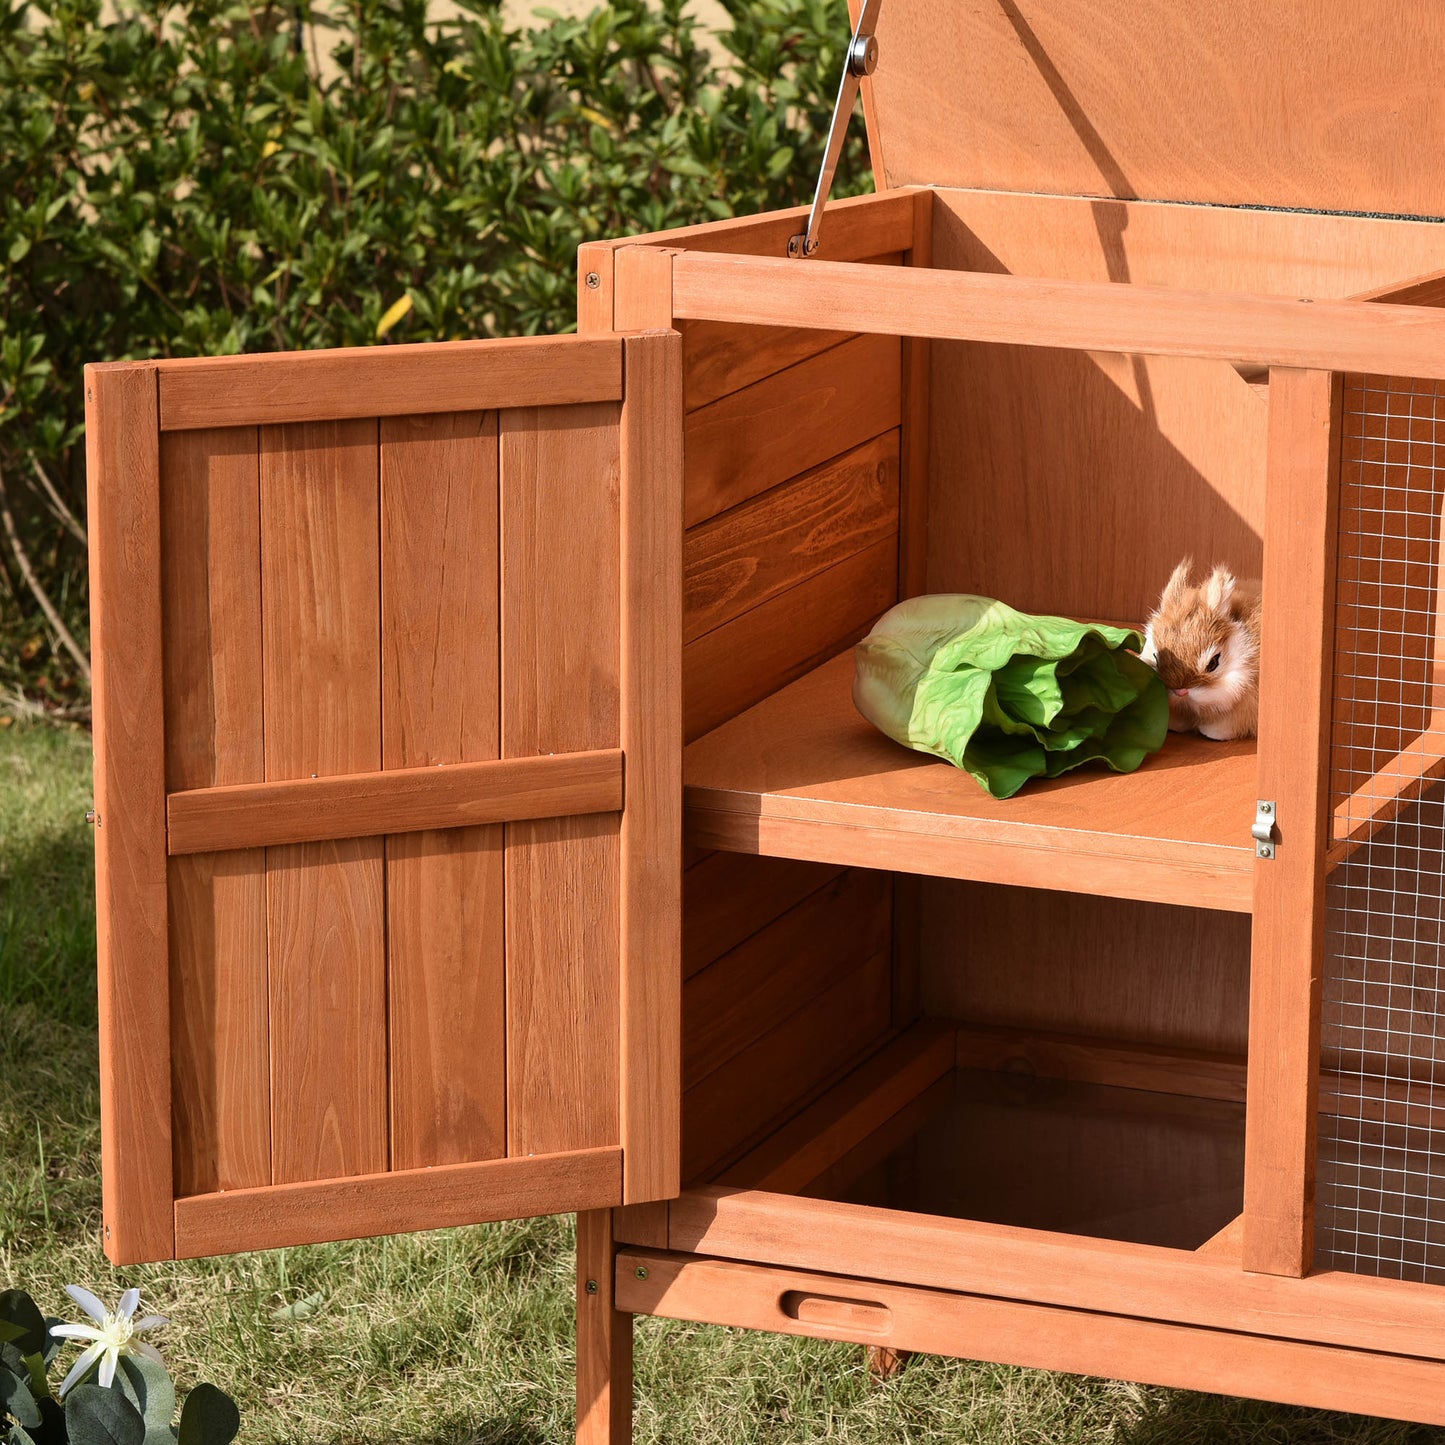 PawHut Wooden Rabbit Hutch Elevated Pet Bunny House with Slide-Out Tray Openable Roof